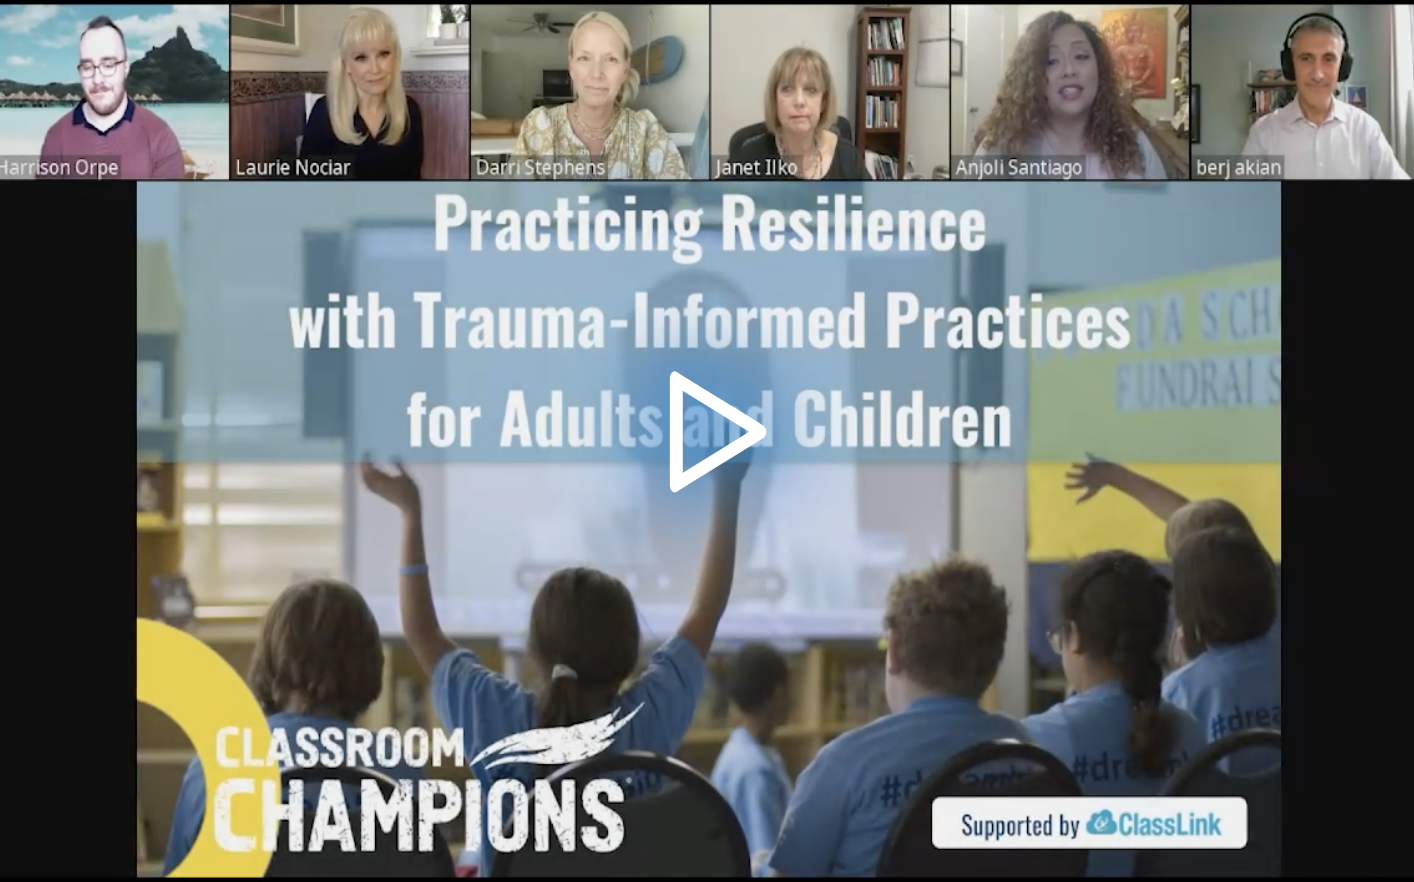 Practicing Resilience with Trauma-Informed Practices for Adults and Students edLeader Panel recording image